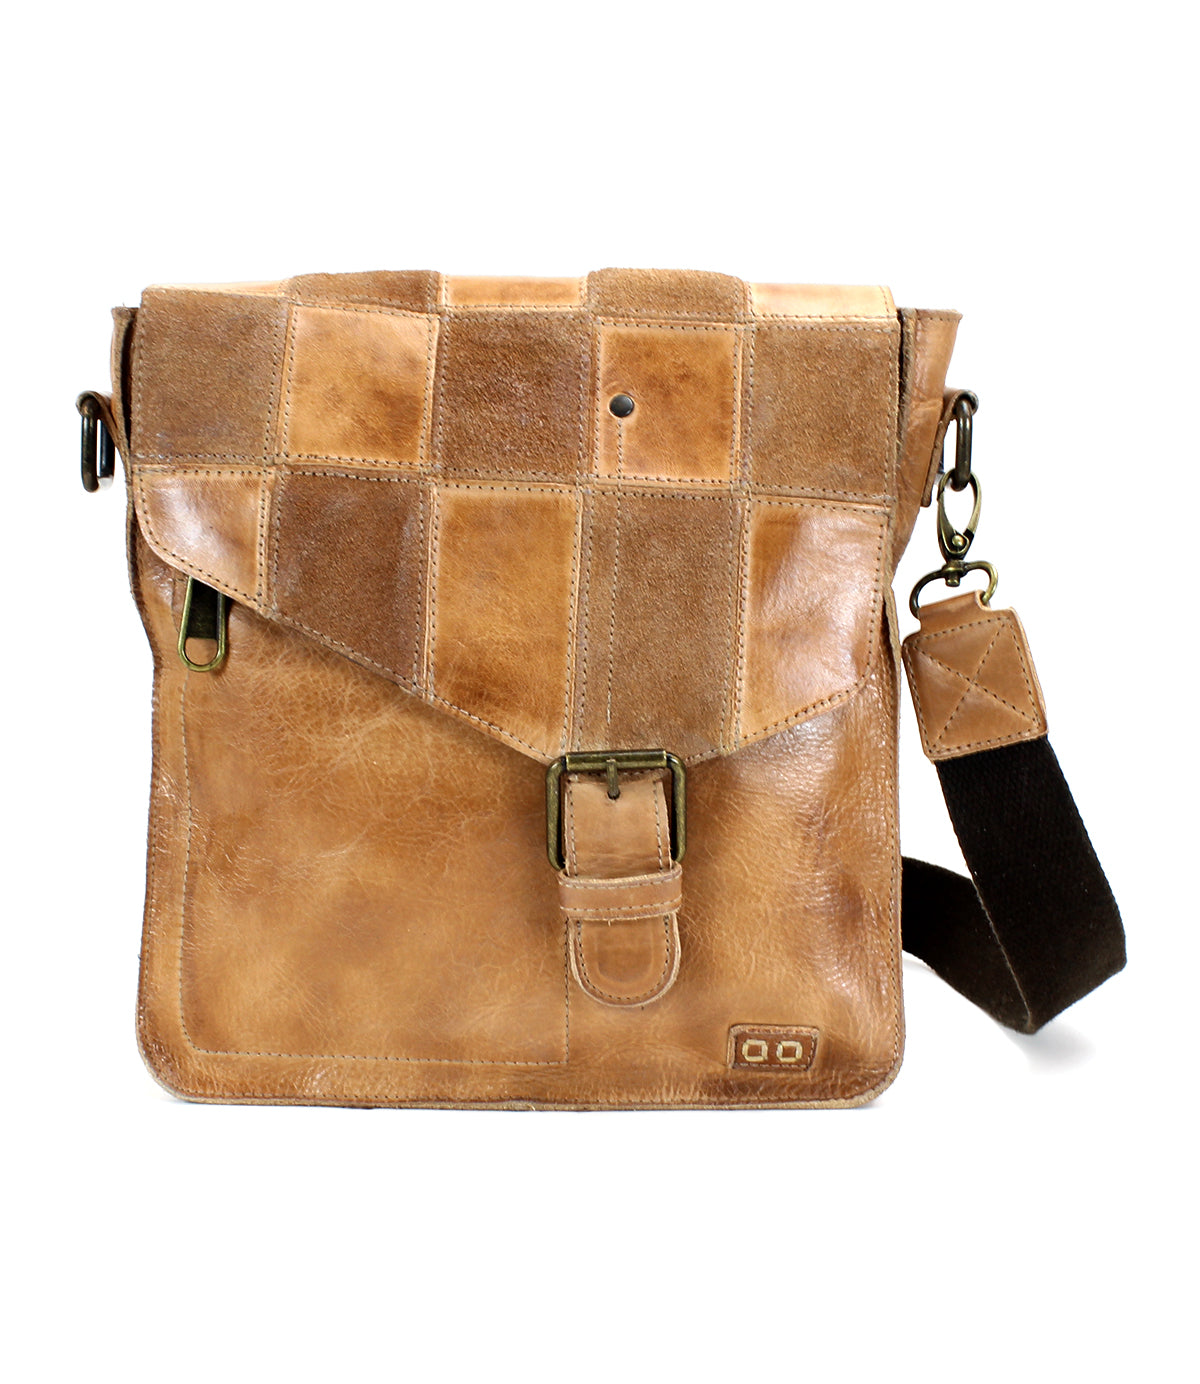 A vintage brown leather Venice Beach II messenger bag by Bed Stu with a buckle closure and an adjustable shoulder strap, featuring a checkered front panel, isolated on a white background.